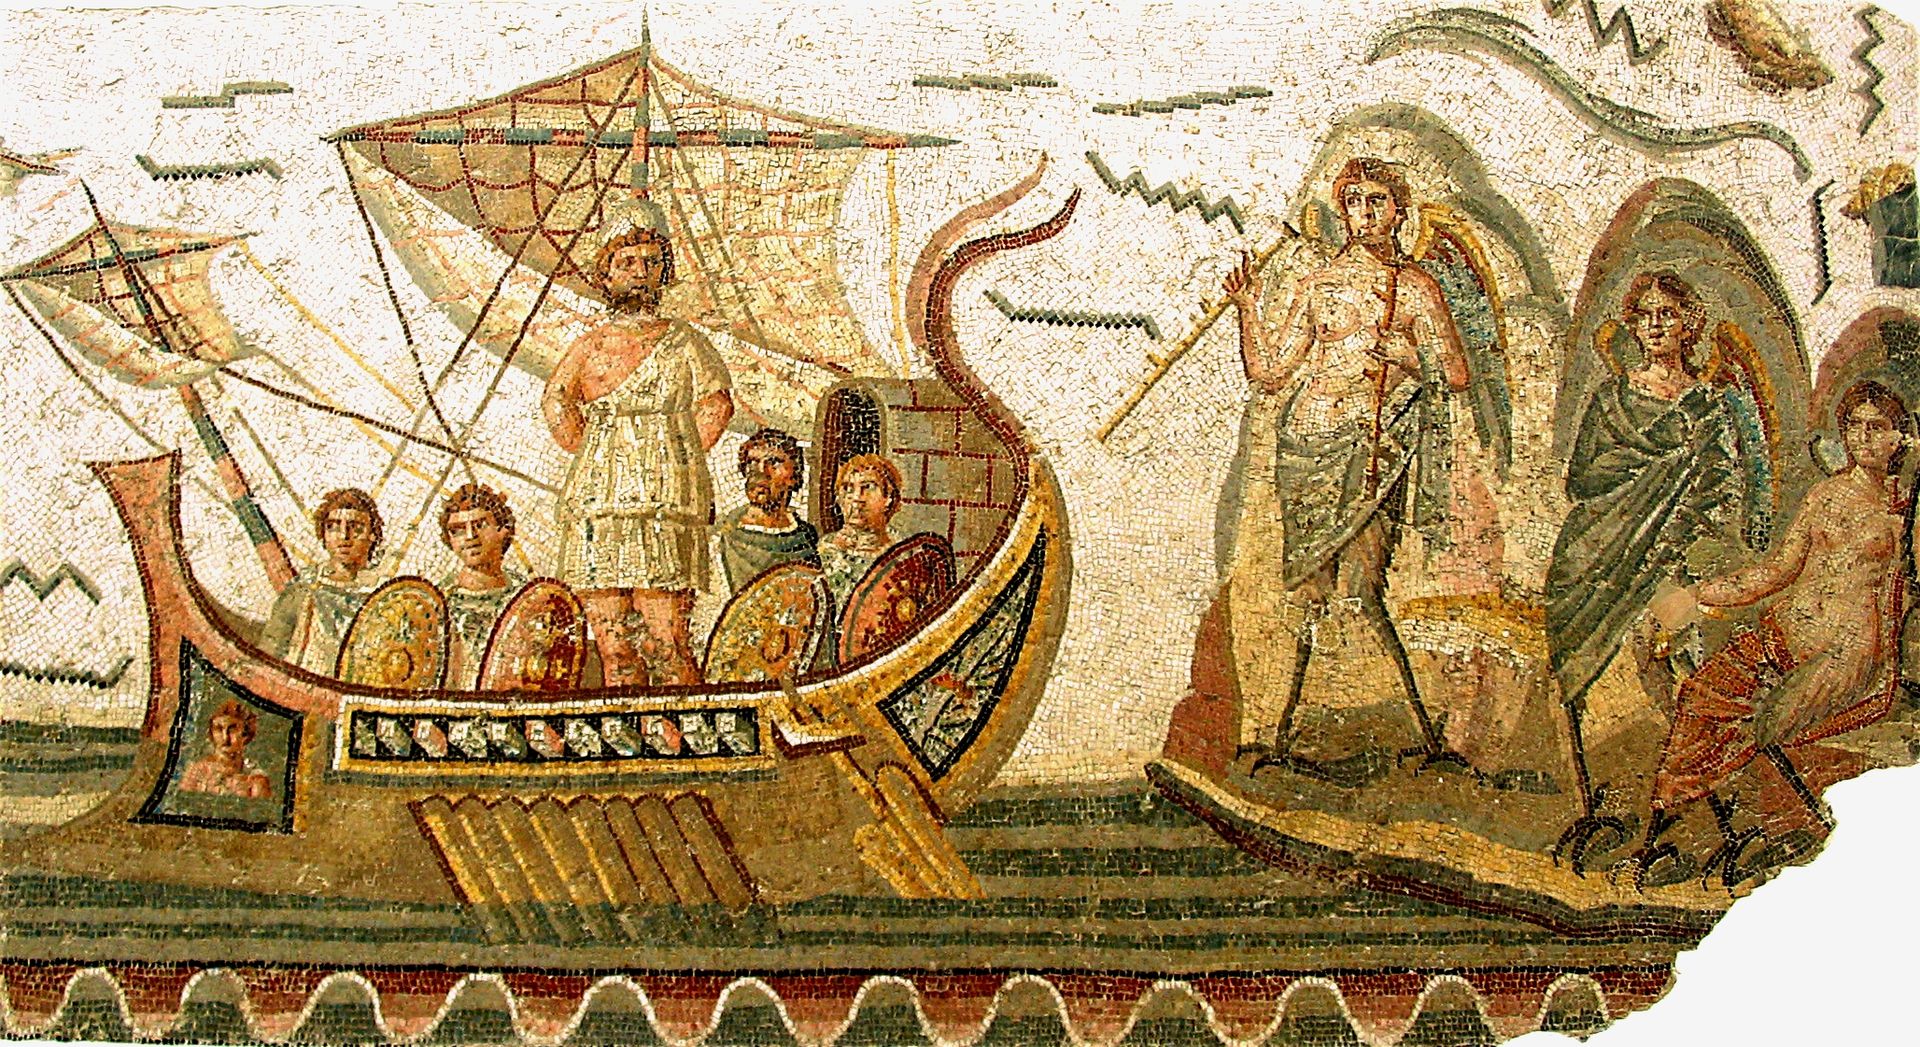 Mosaic depicting the temptation of Odysseus by the Sirens.